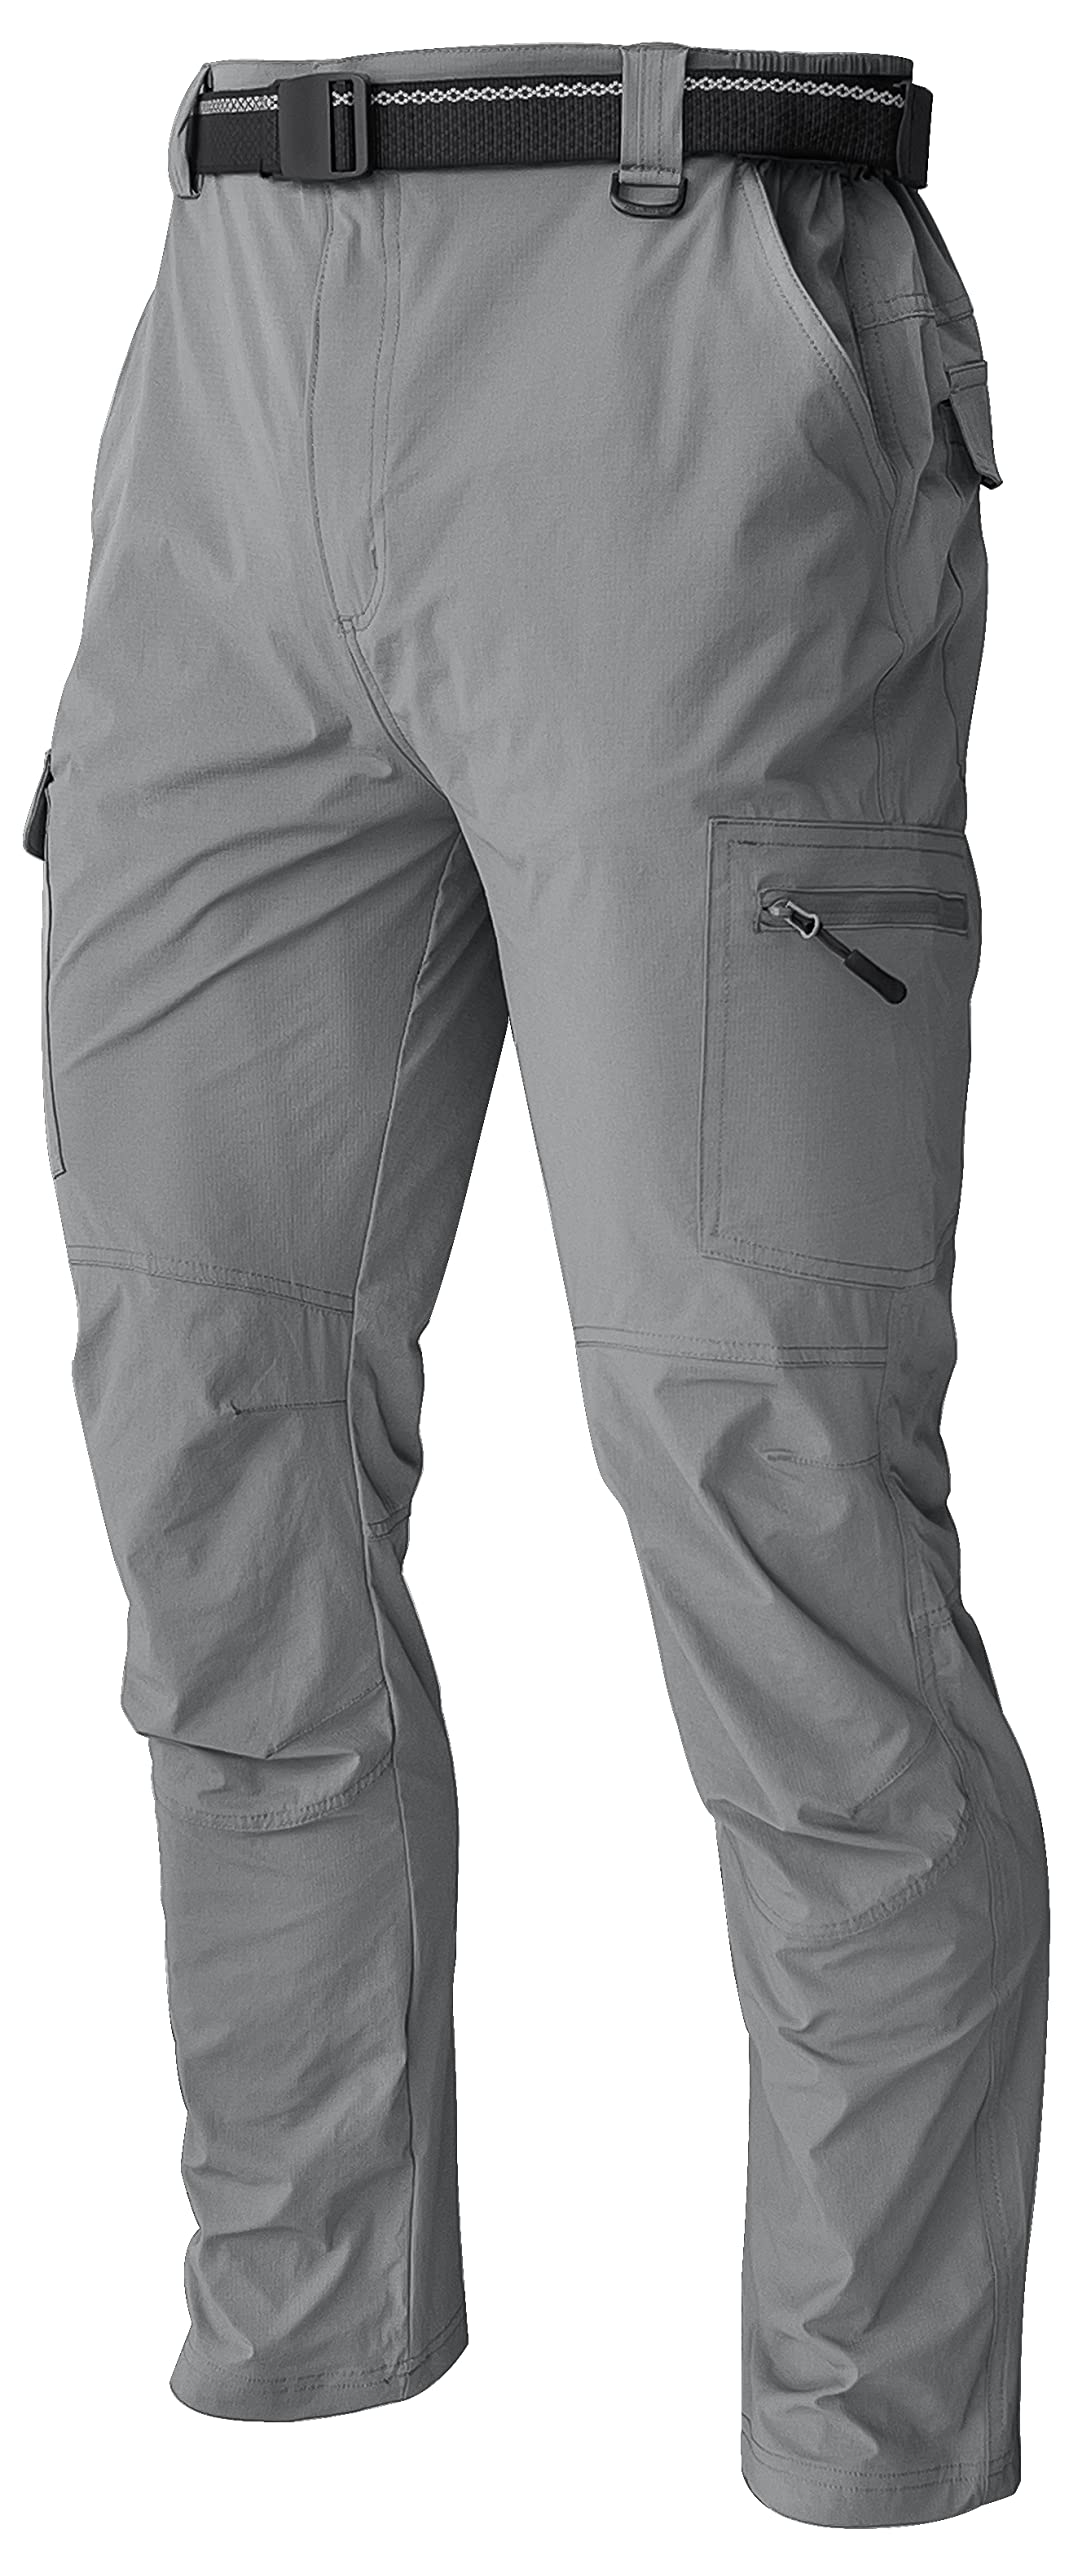  Womens Hiking Pants Lightweight Water Resistant Plus Size  Loose Fit Golf Cargo Travel Pants Outdoor Fishing Camping Pants Pockets  Light Grey 4XL